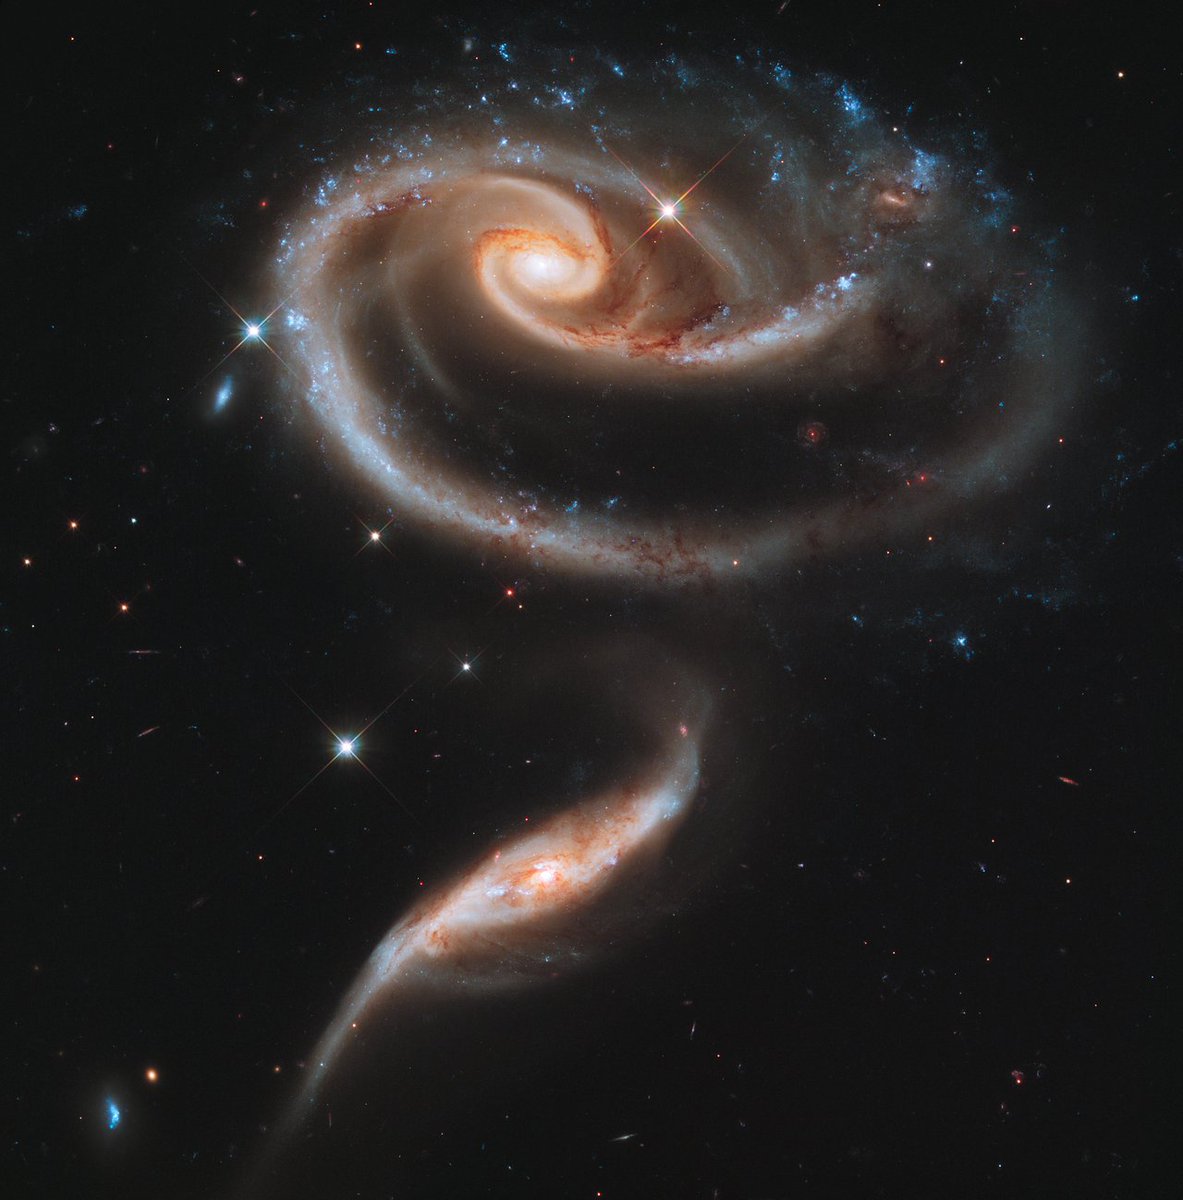 A rose made of galaxies - (Arp 273) Credit: NASA, ESA and the Hubble Heritage Team (STScIAURA)